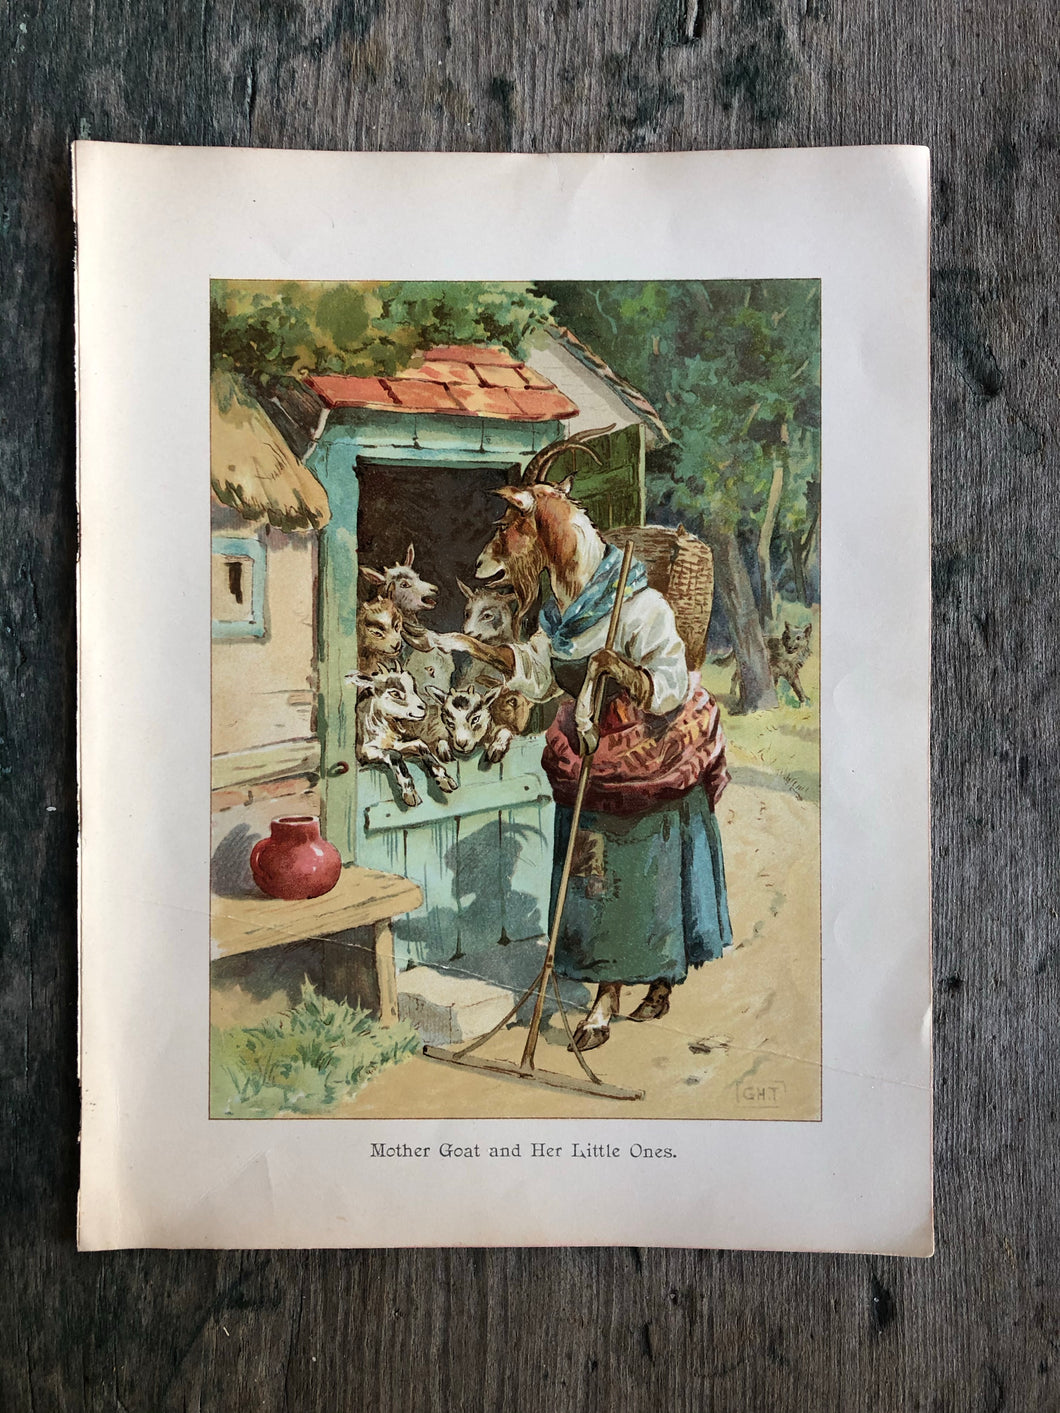 Print from “Mother Goose Nursery Tales”